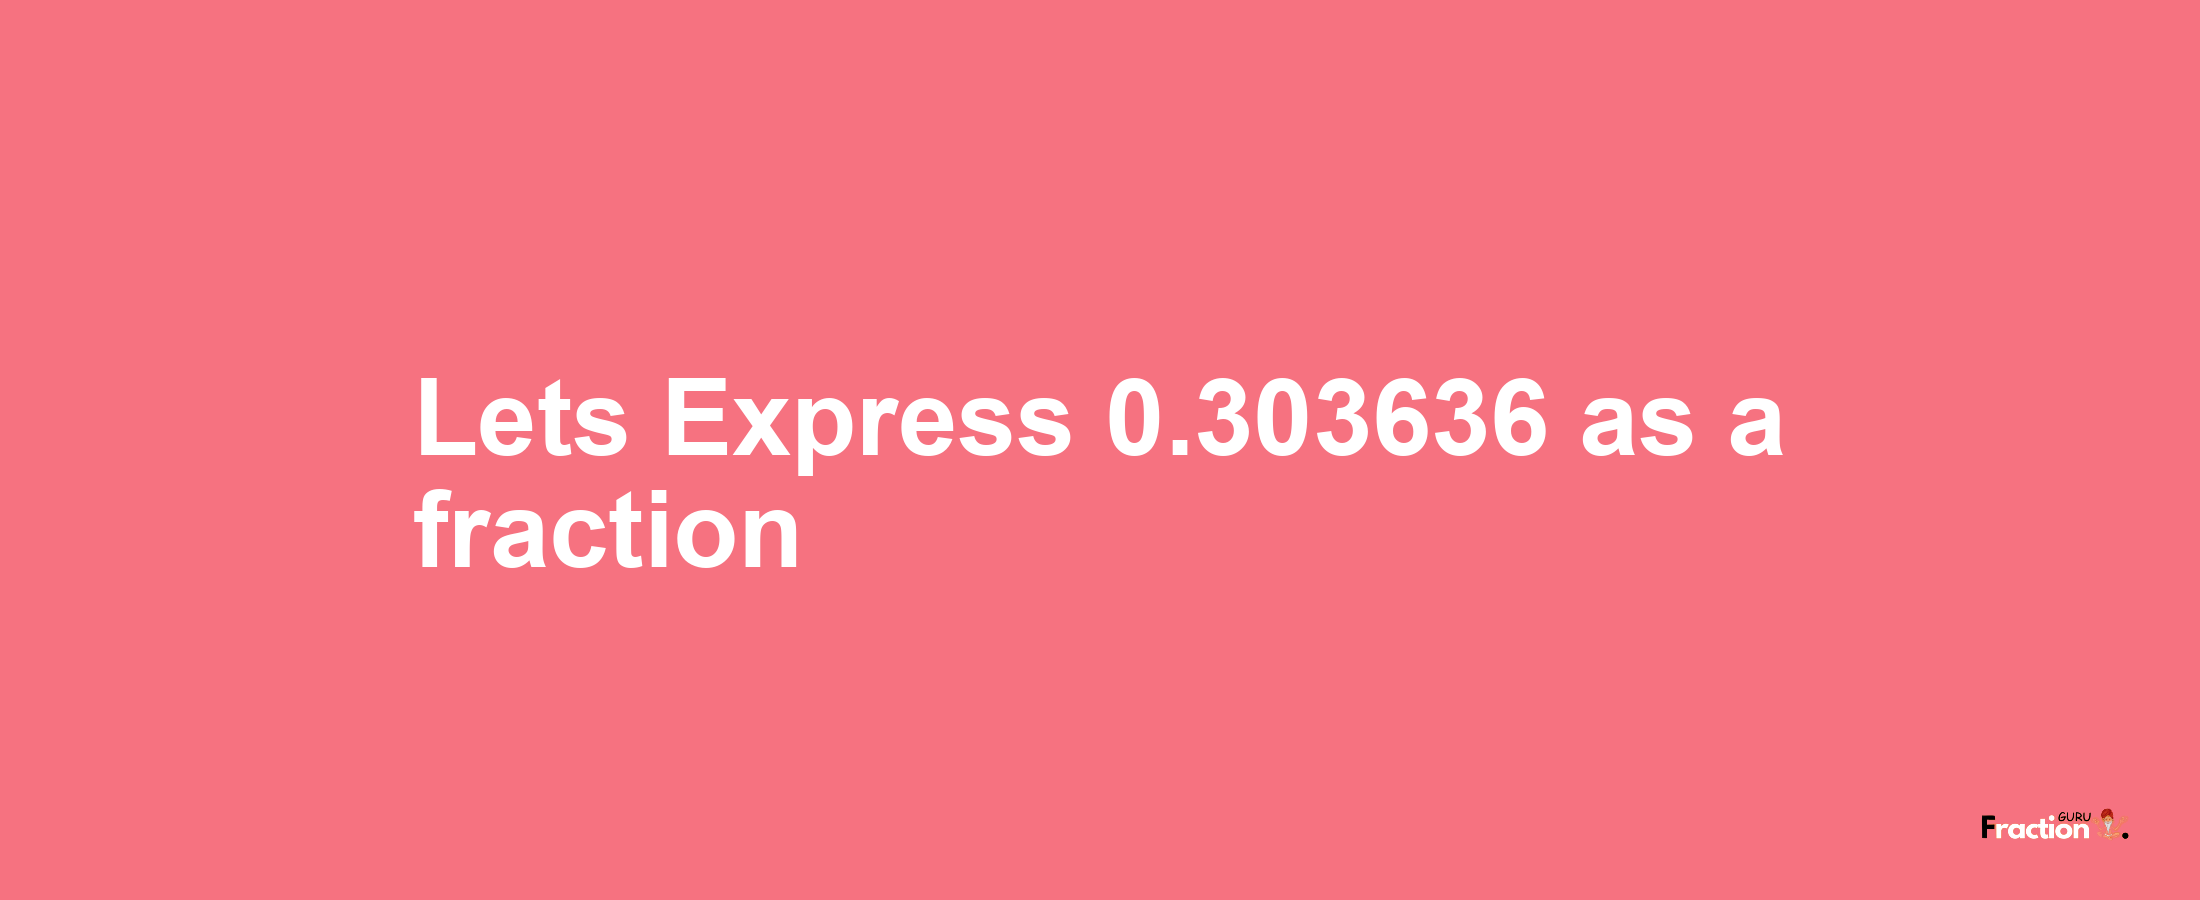 Lets Express 0.303636 as afraction